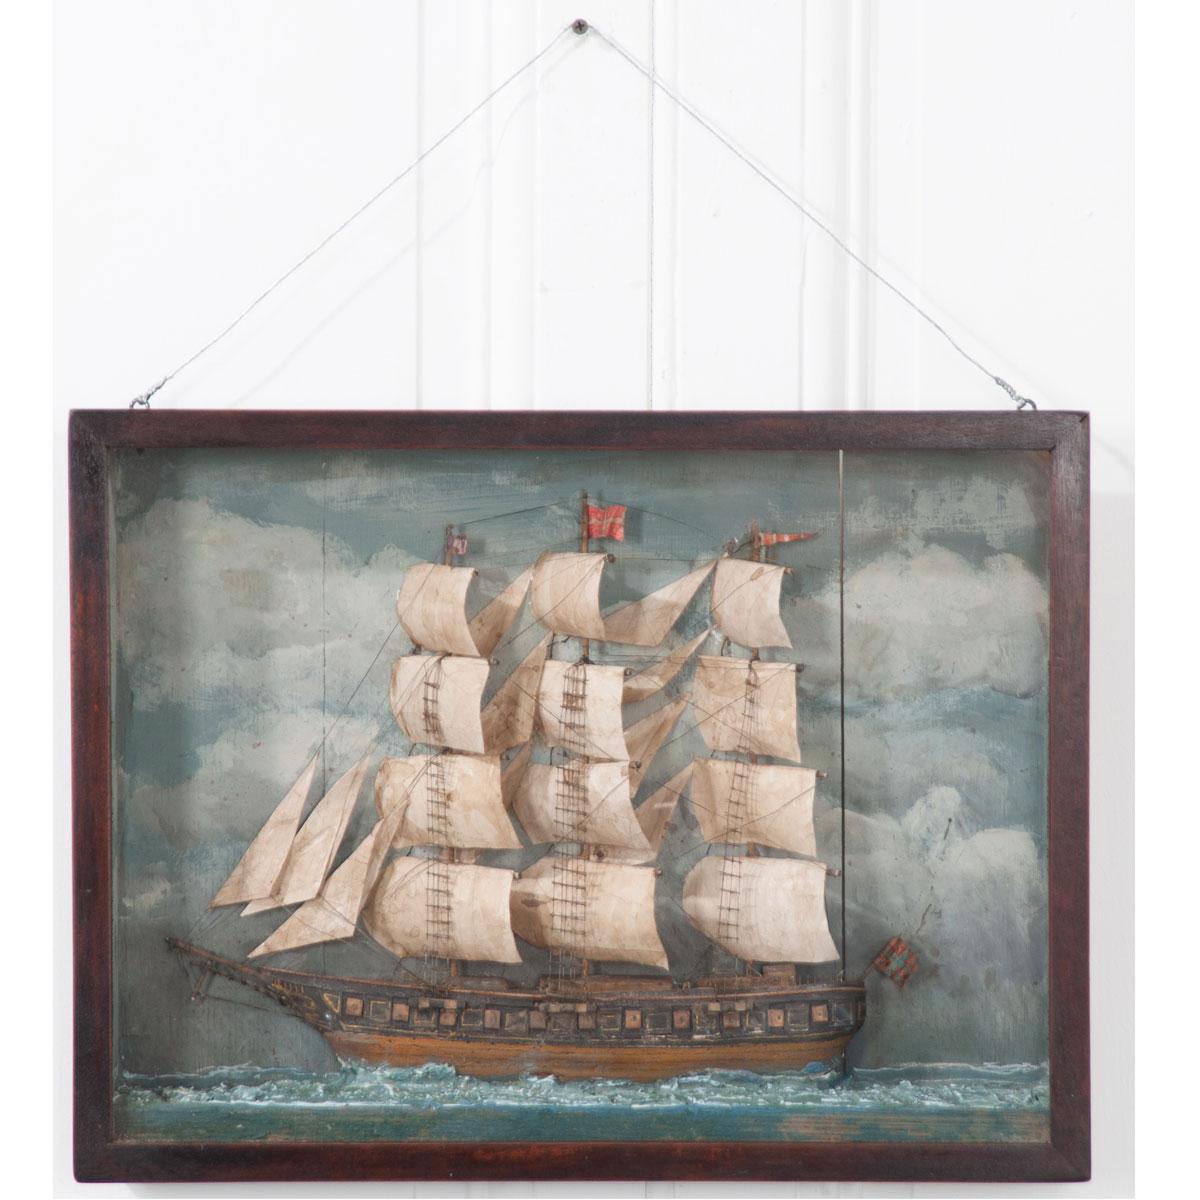 A brilliant English, 19th century nautically themed diorama featuring a schooner in a stained wood, framed box. These three-dimensional works of art were typically made by sailors. Note the meticulously detailed sails, masts, ropes, netting and